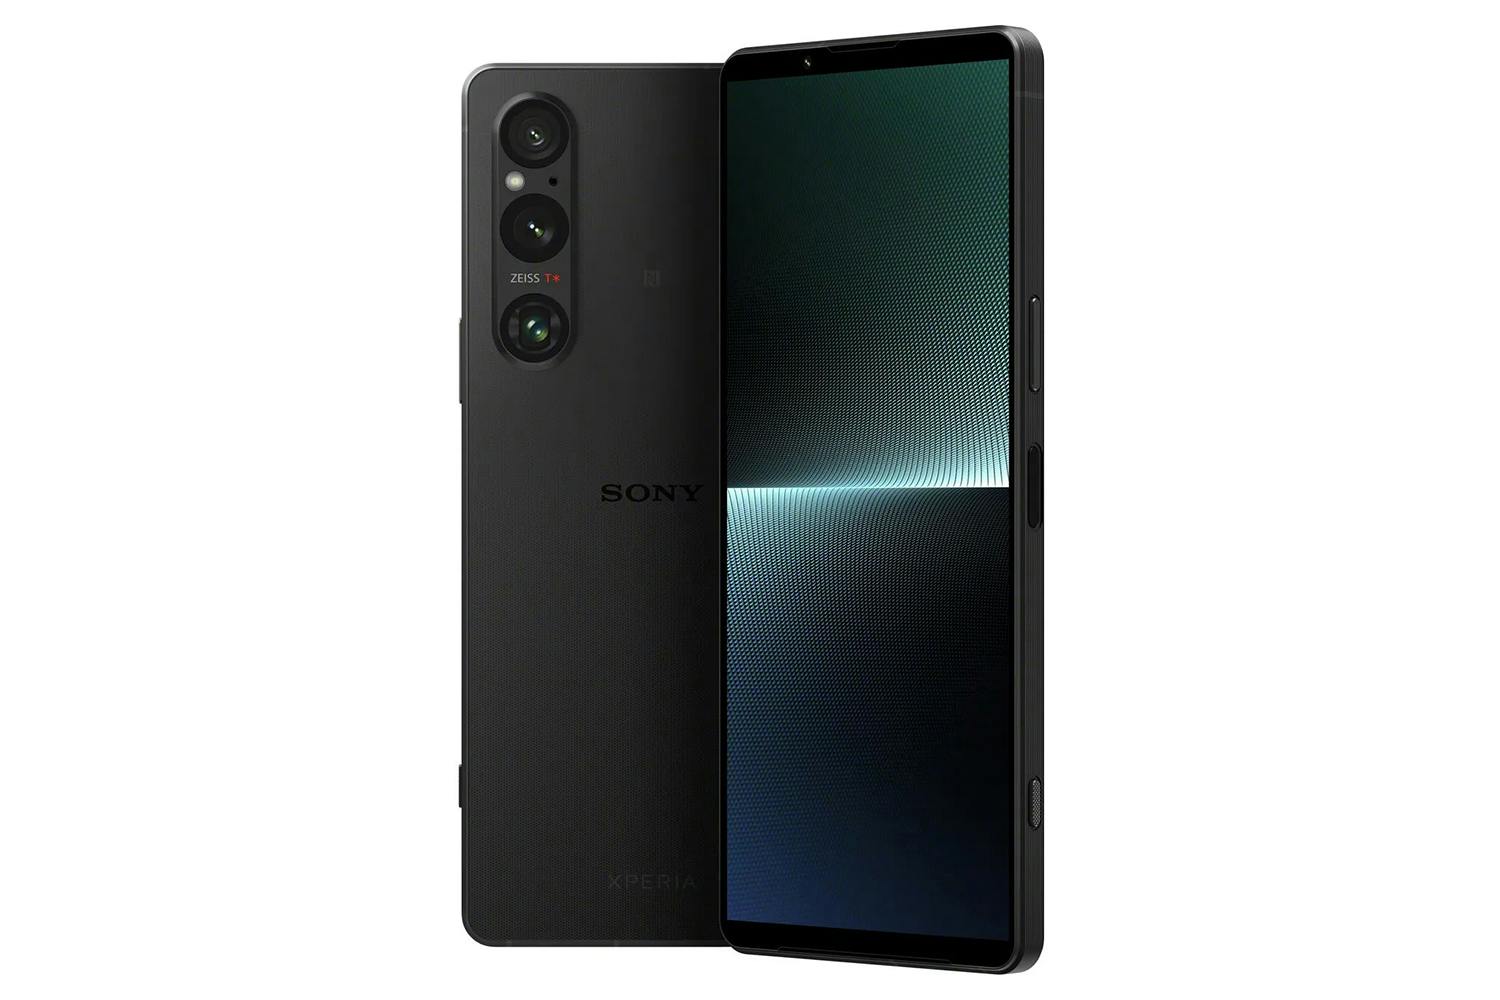 Sony Xperia 1 V pictures, official photos